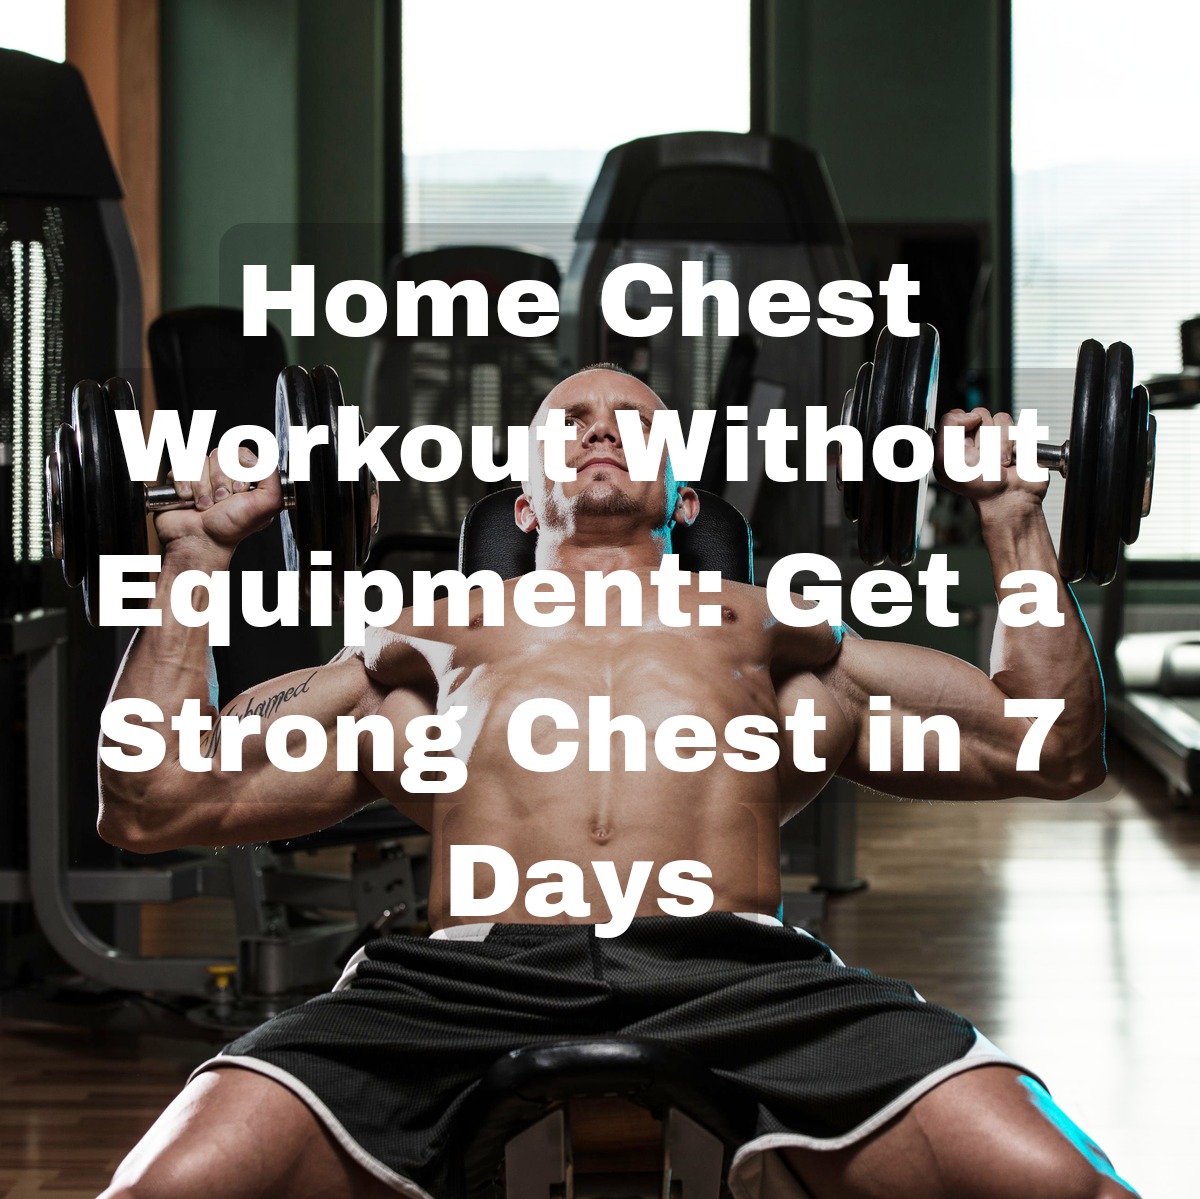 Home Chest Workout Without Equipment: Get a Strong Chest in 7 Days